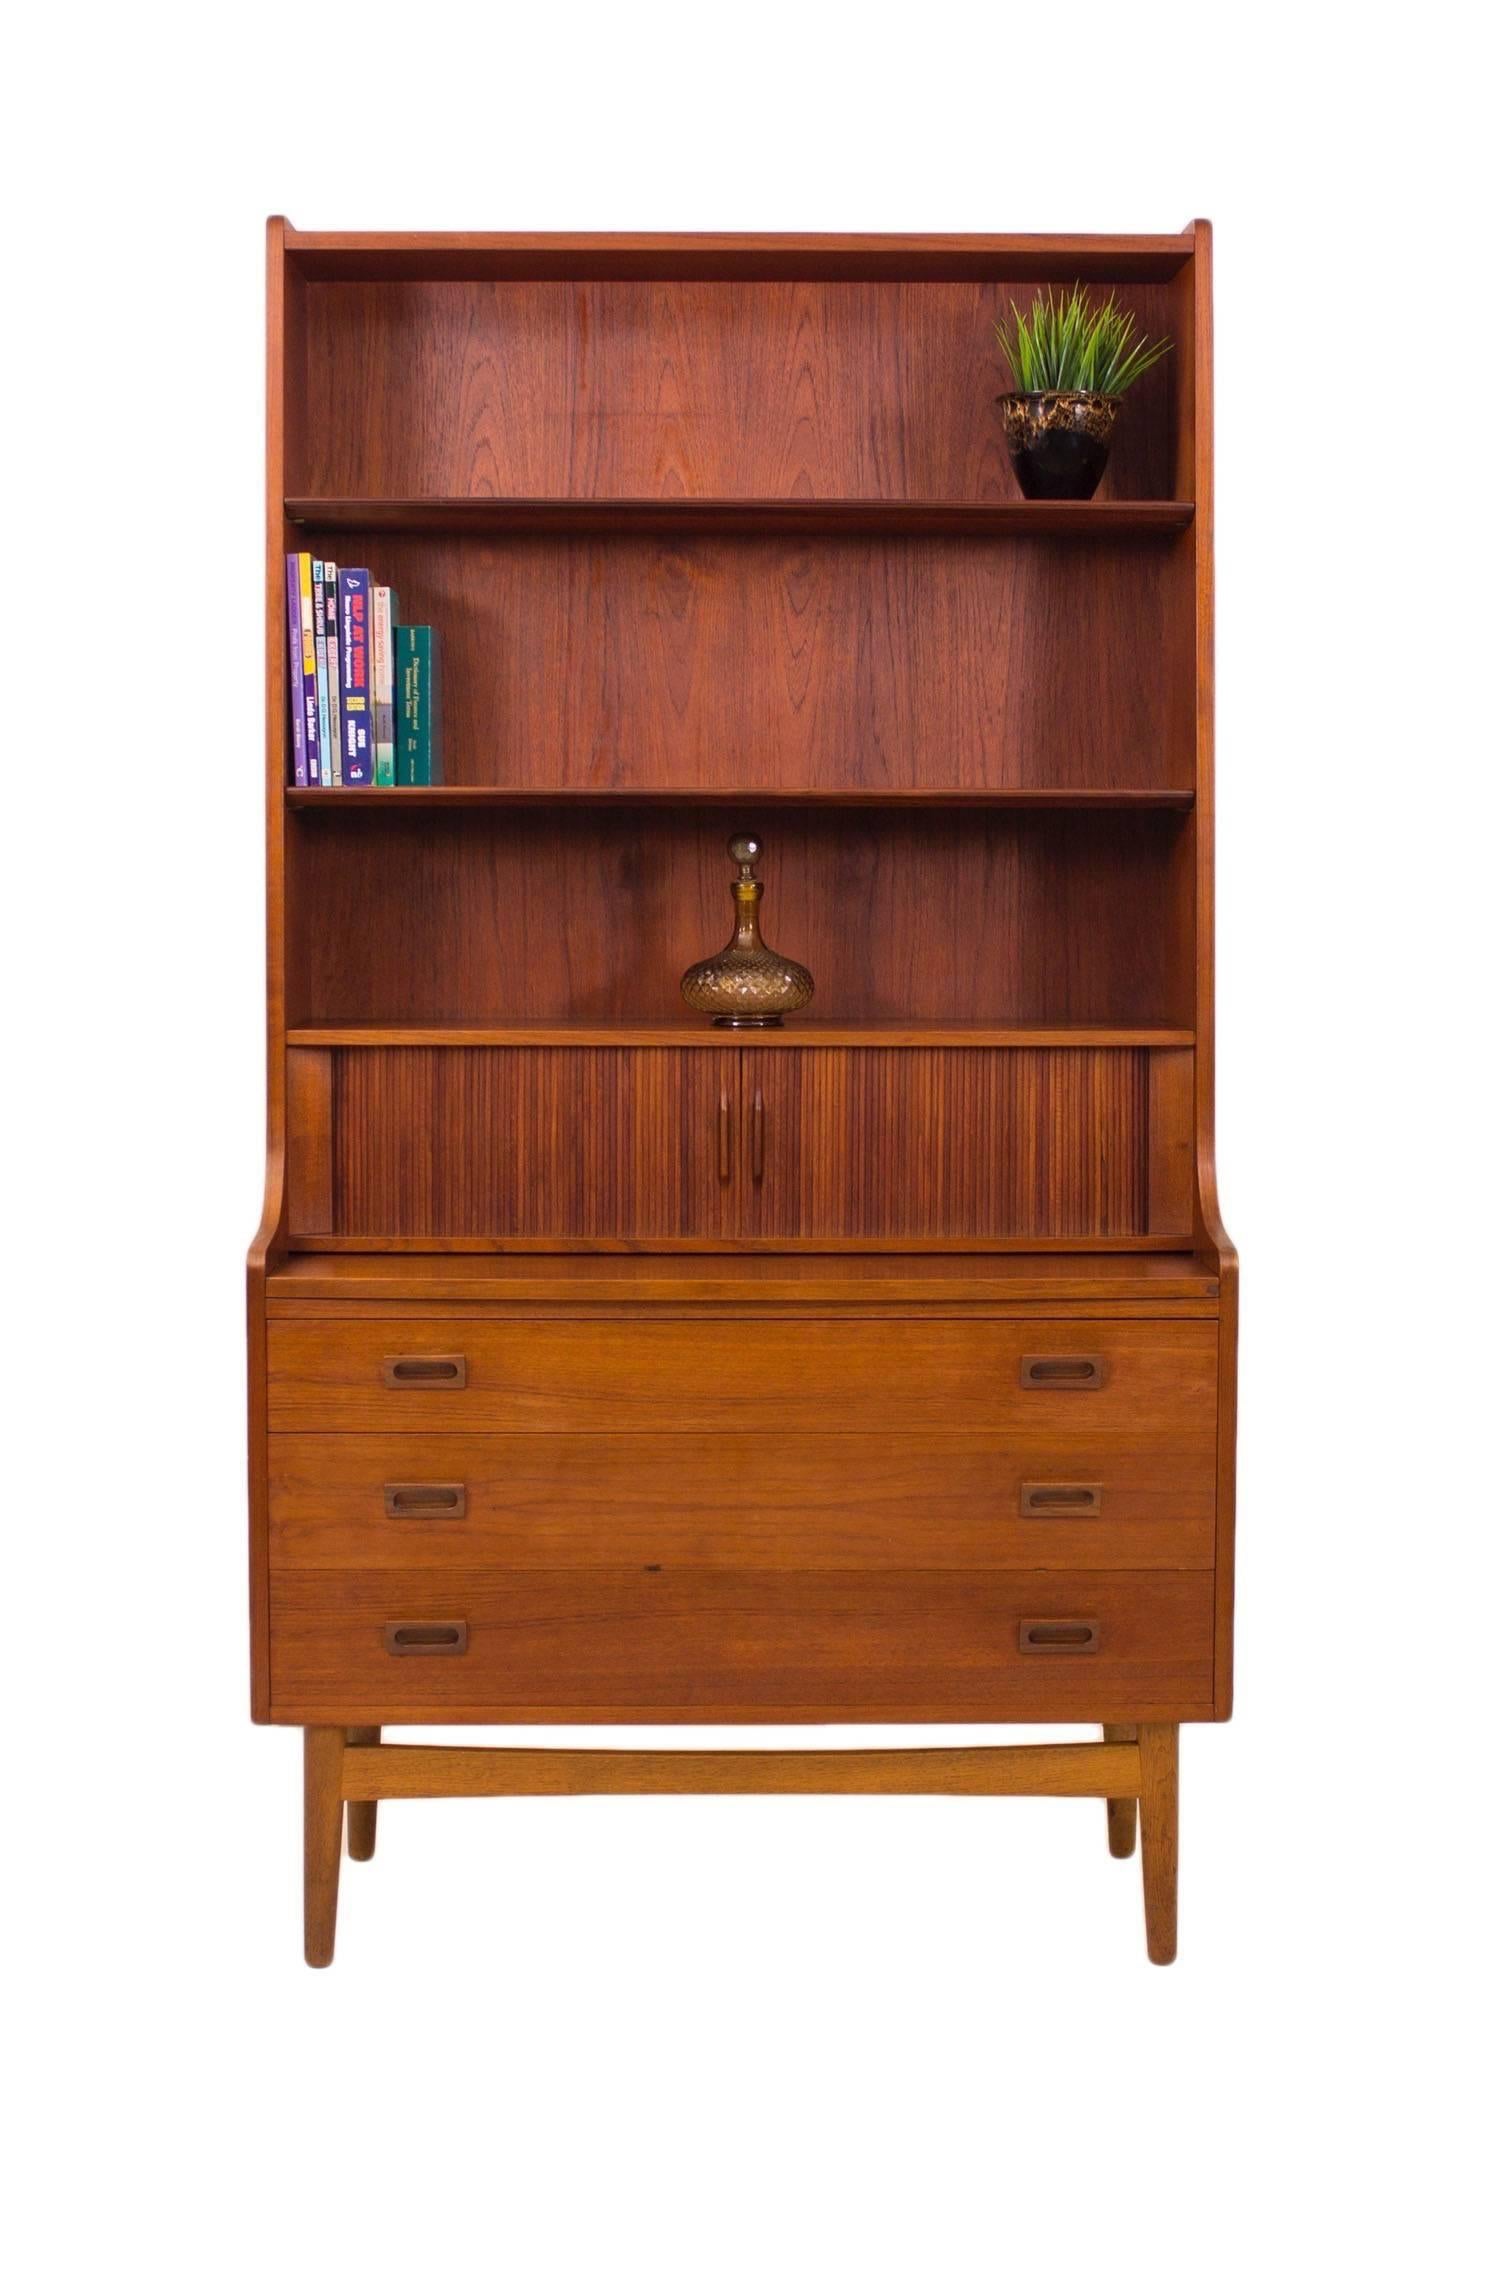 Bornholm Mobler led the way in bringing Danish Mid-Century designs to the world in innovative and functional ways.

This stunning Bureau shelving unit in beautiful rich teak is a fantastic multi functional unit offering not only ample storage in